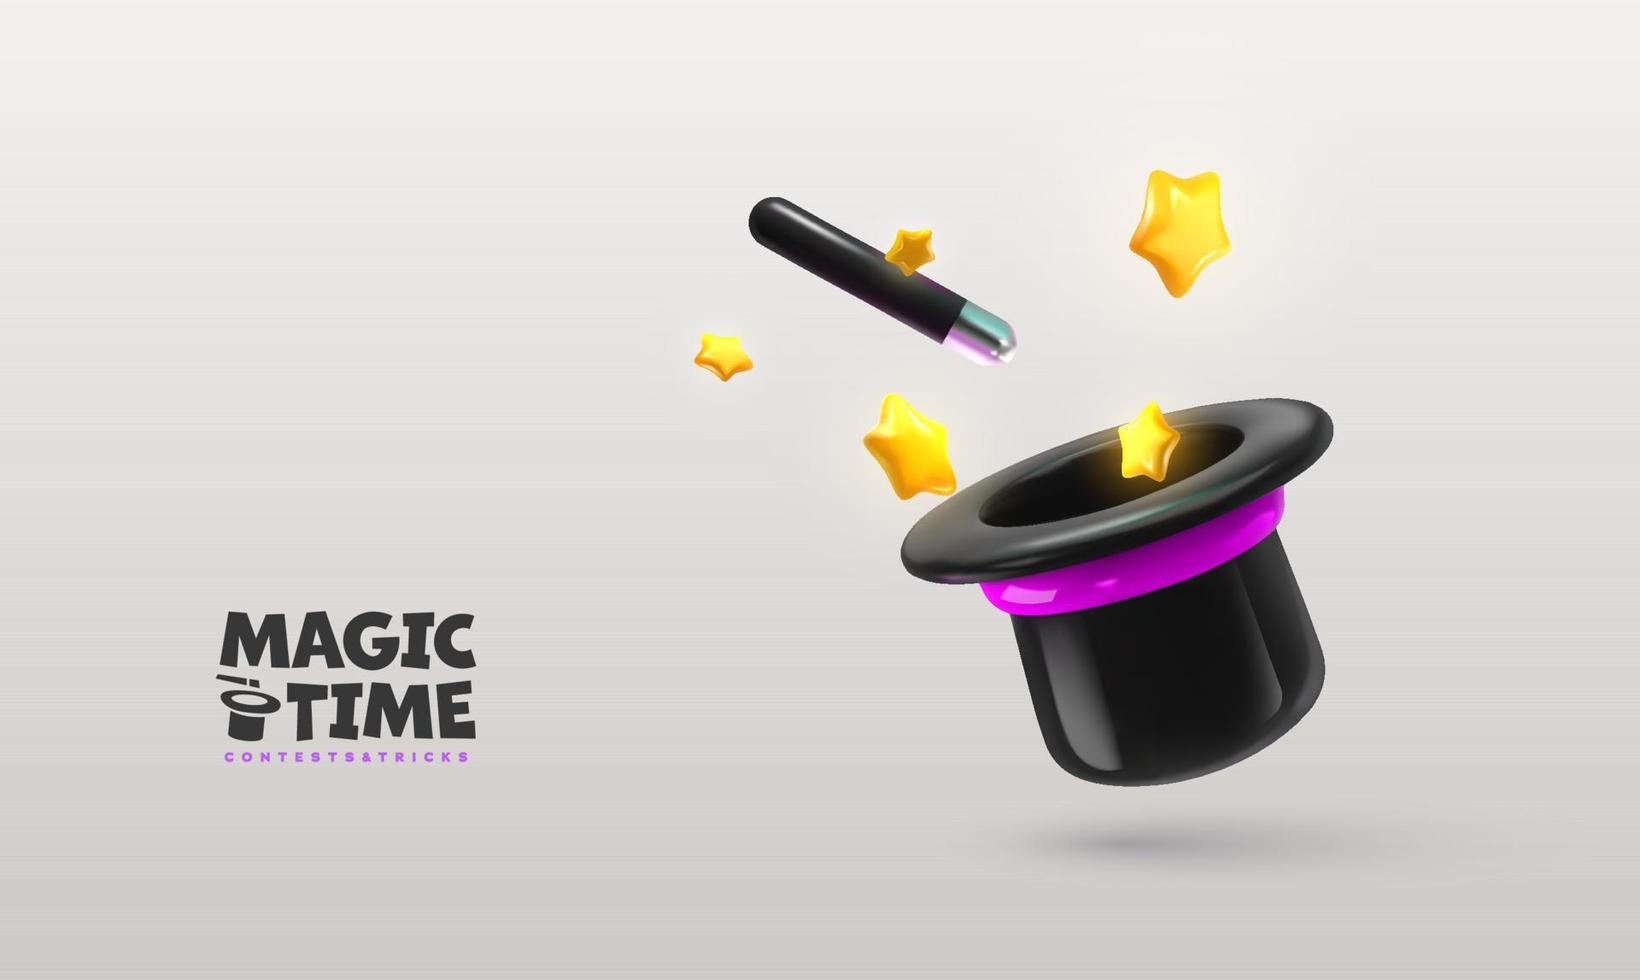 Magic wand and hat with stars explosion outside on light background vector illustration. Wizard tool, magic stick with spell